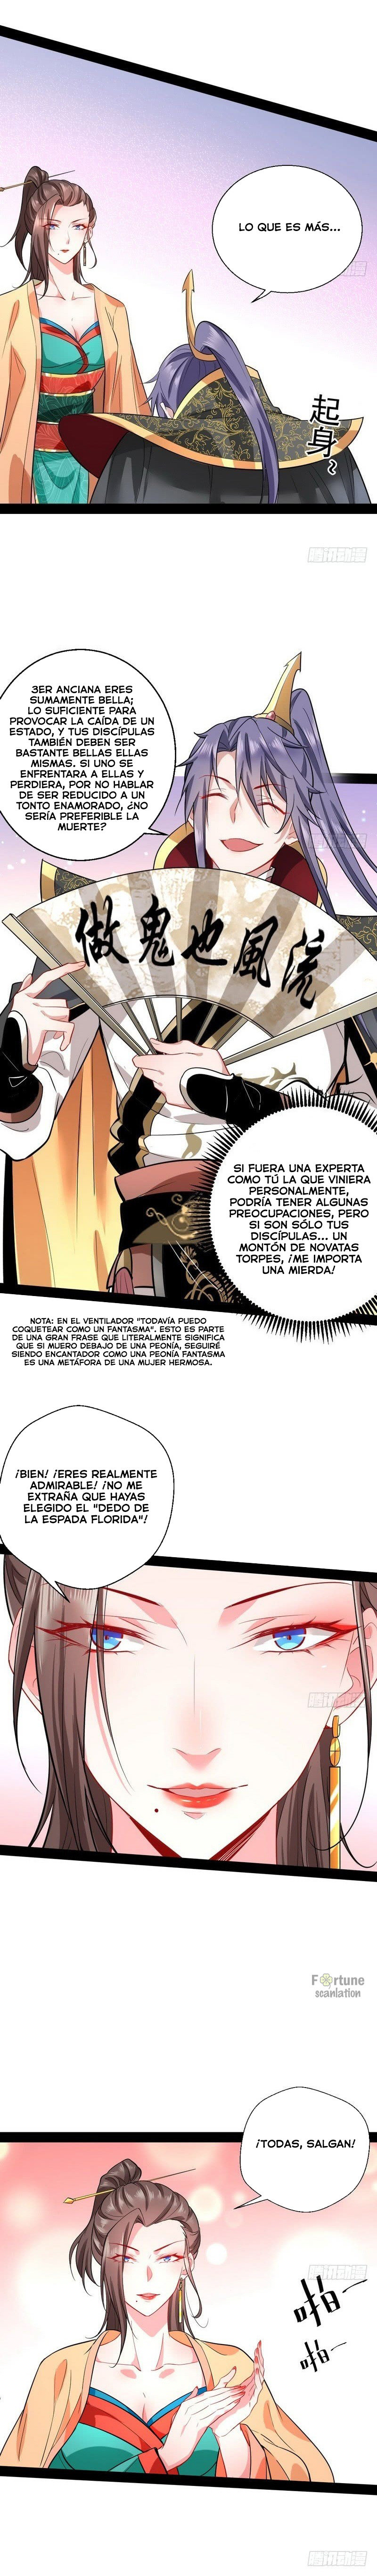 Manga Soy un dios maligno Chapter 26 image number 7